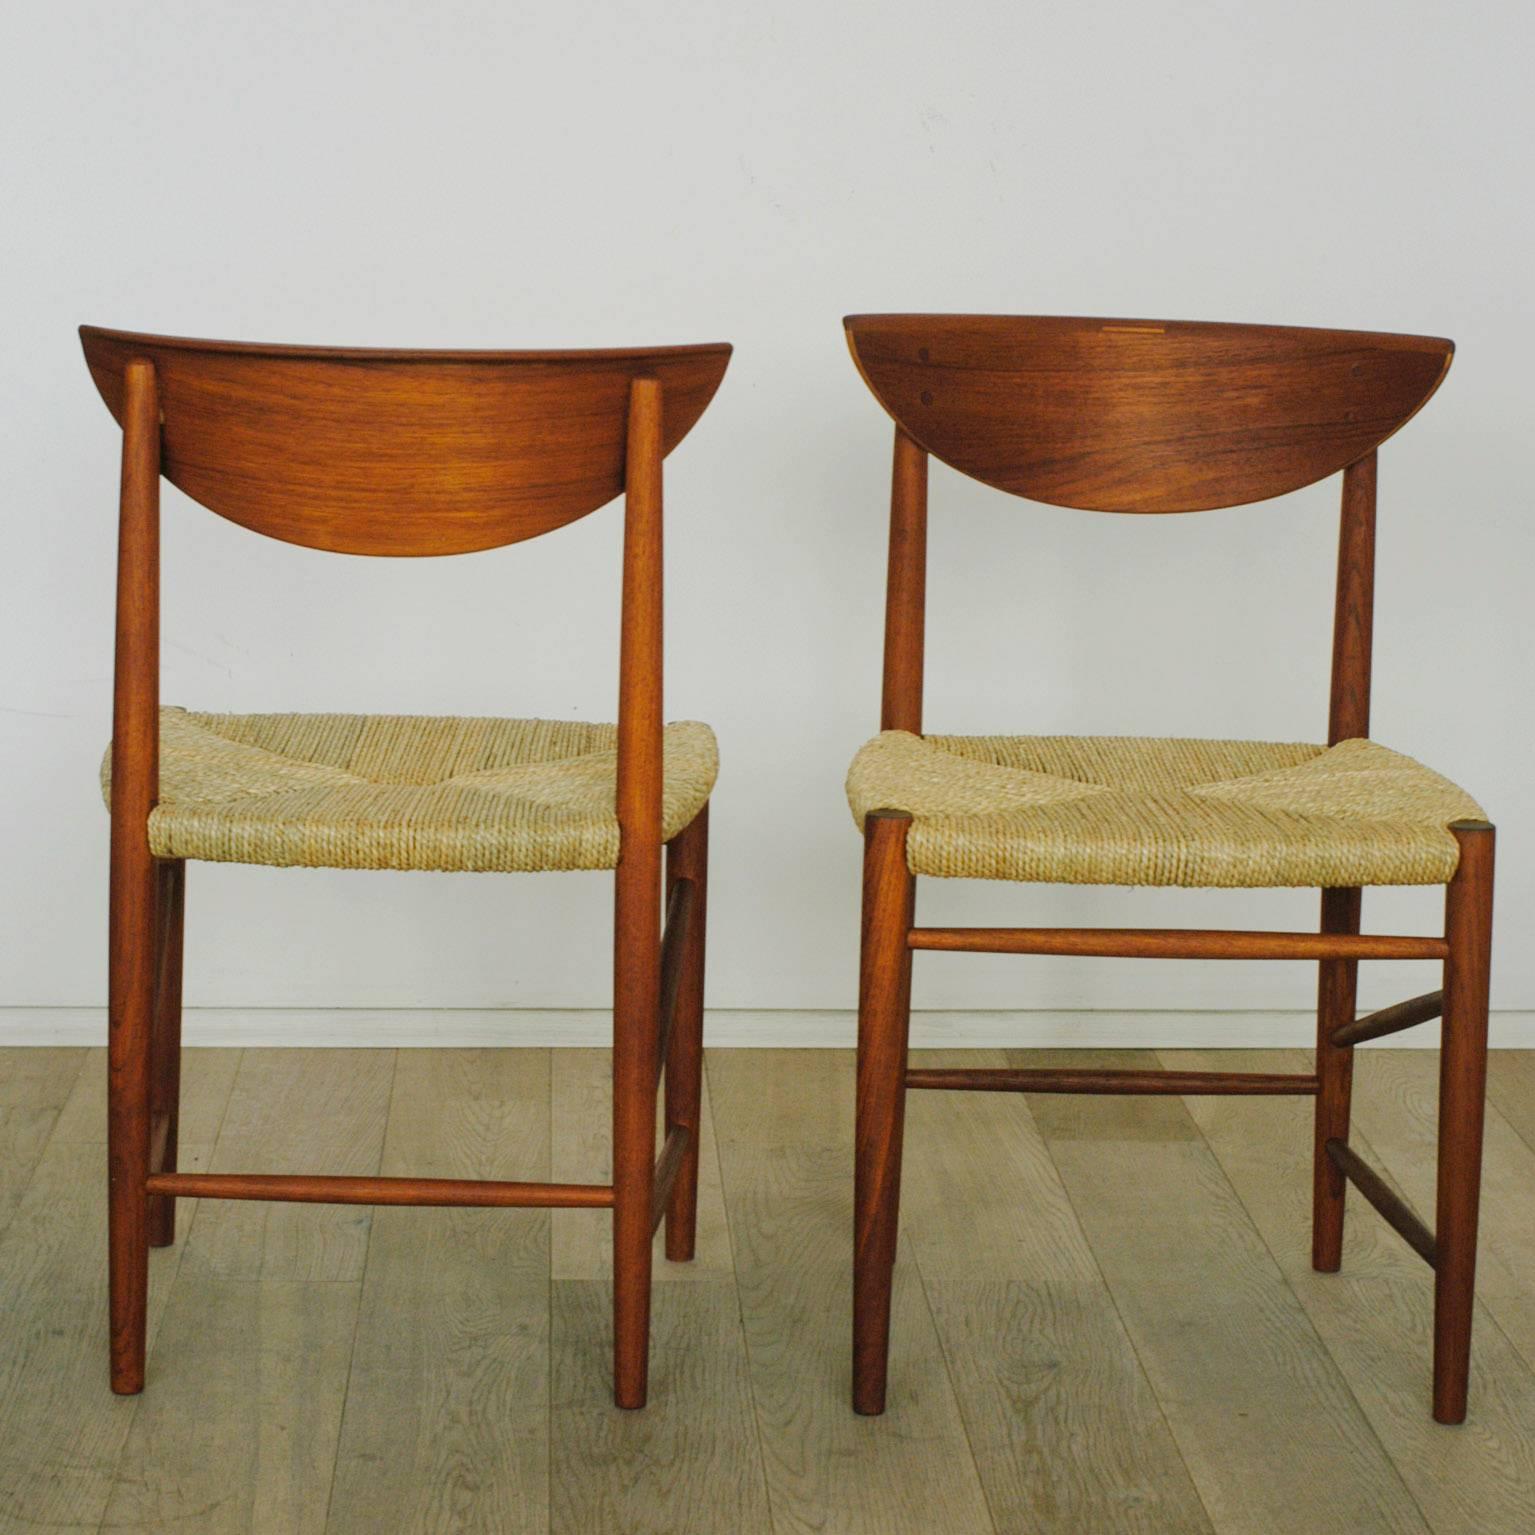 Iconic excellent Scandinavian Modern teak chair with renewed cane seat manufactured by Soborg Mobler.
